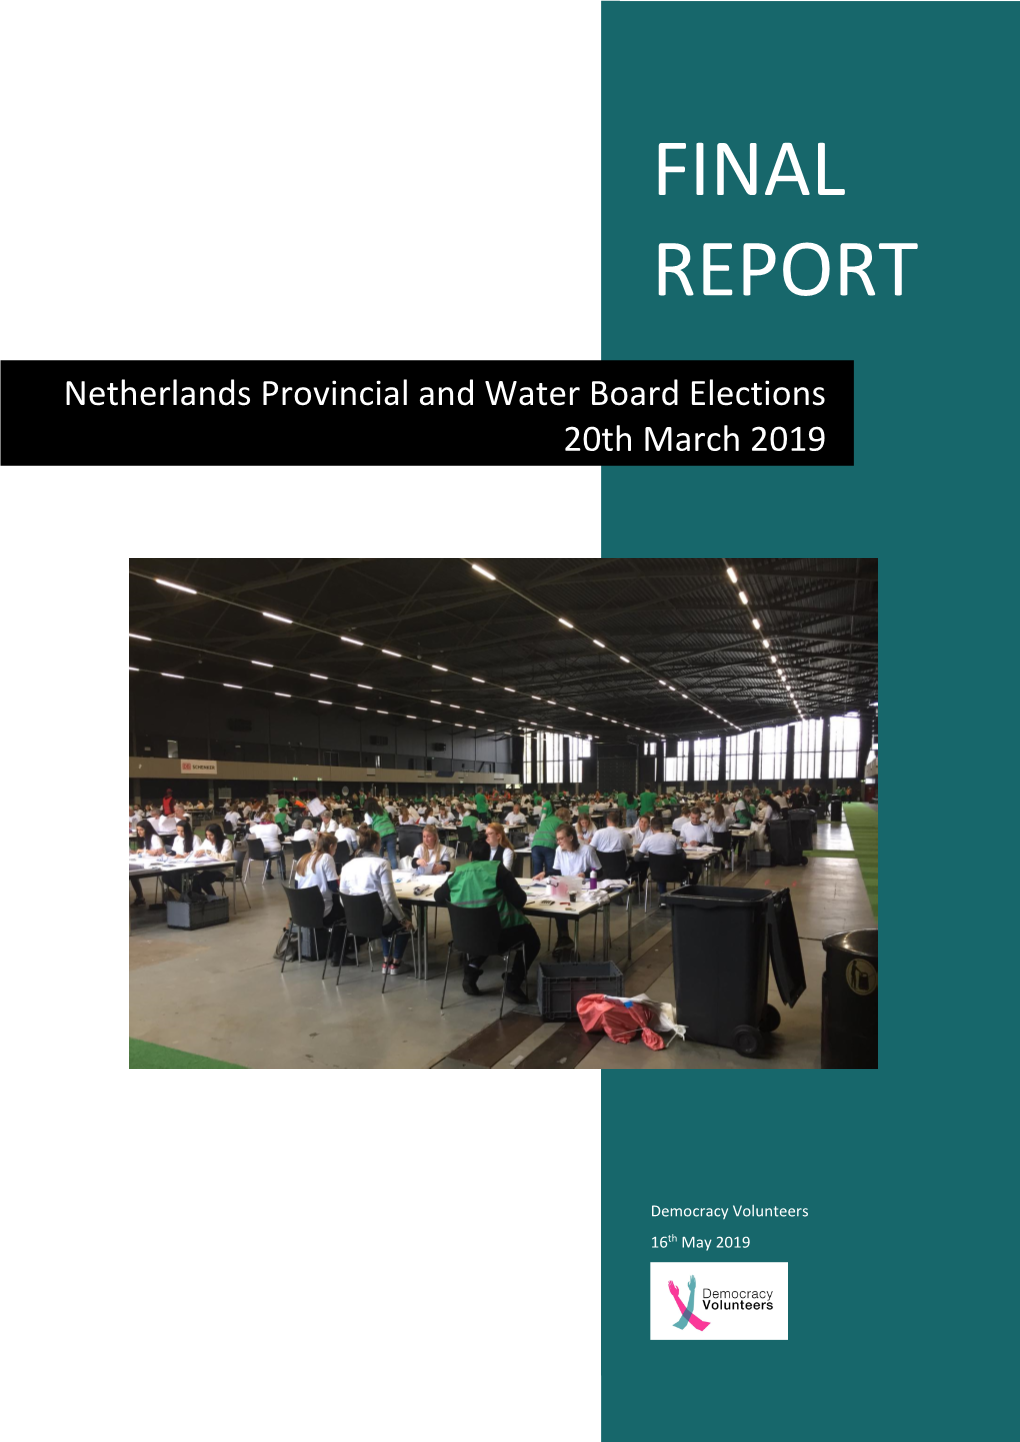 Netherlands Provincial & Water Board Elections Final Report 20Th March